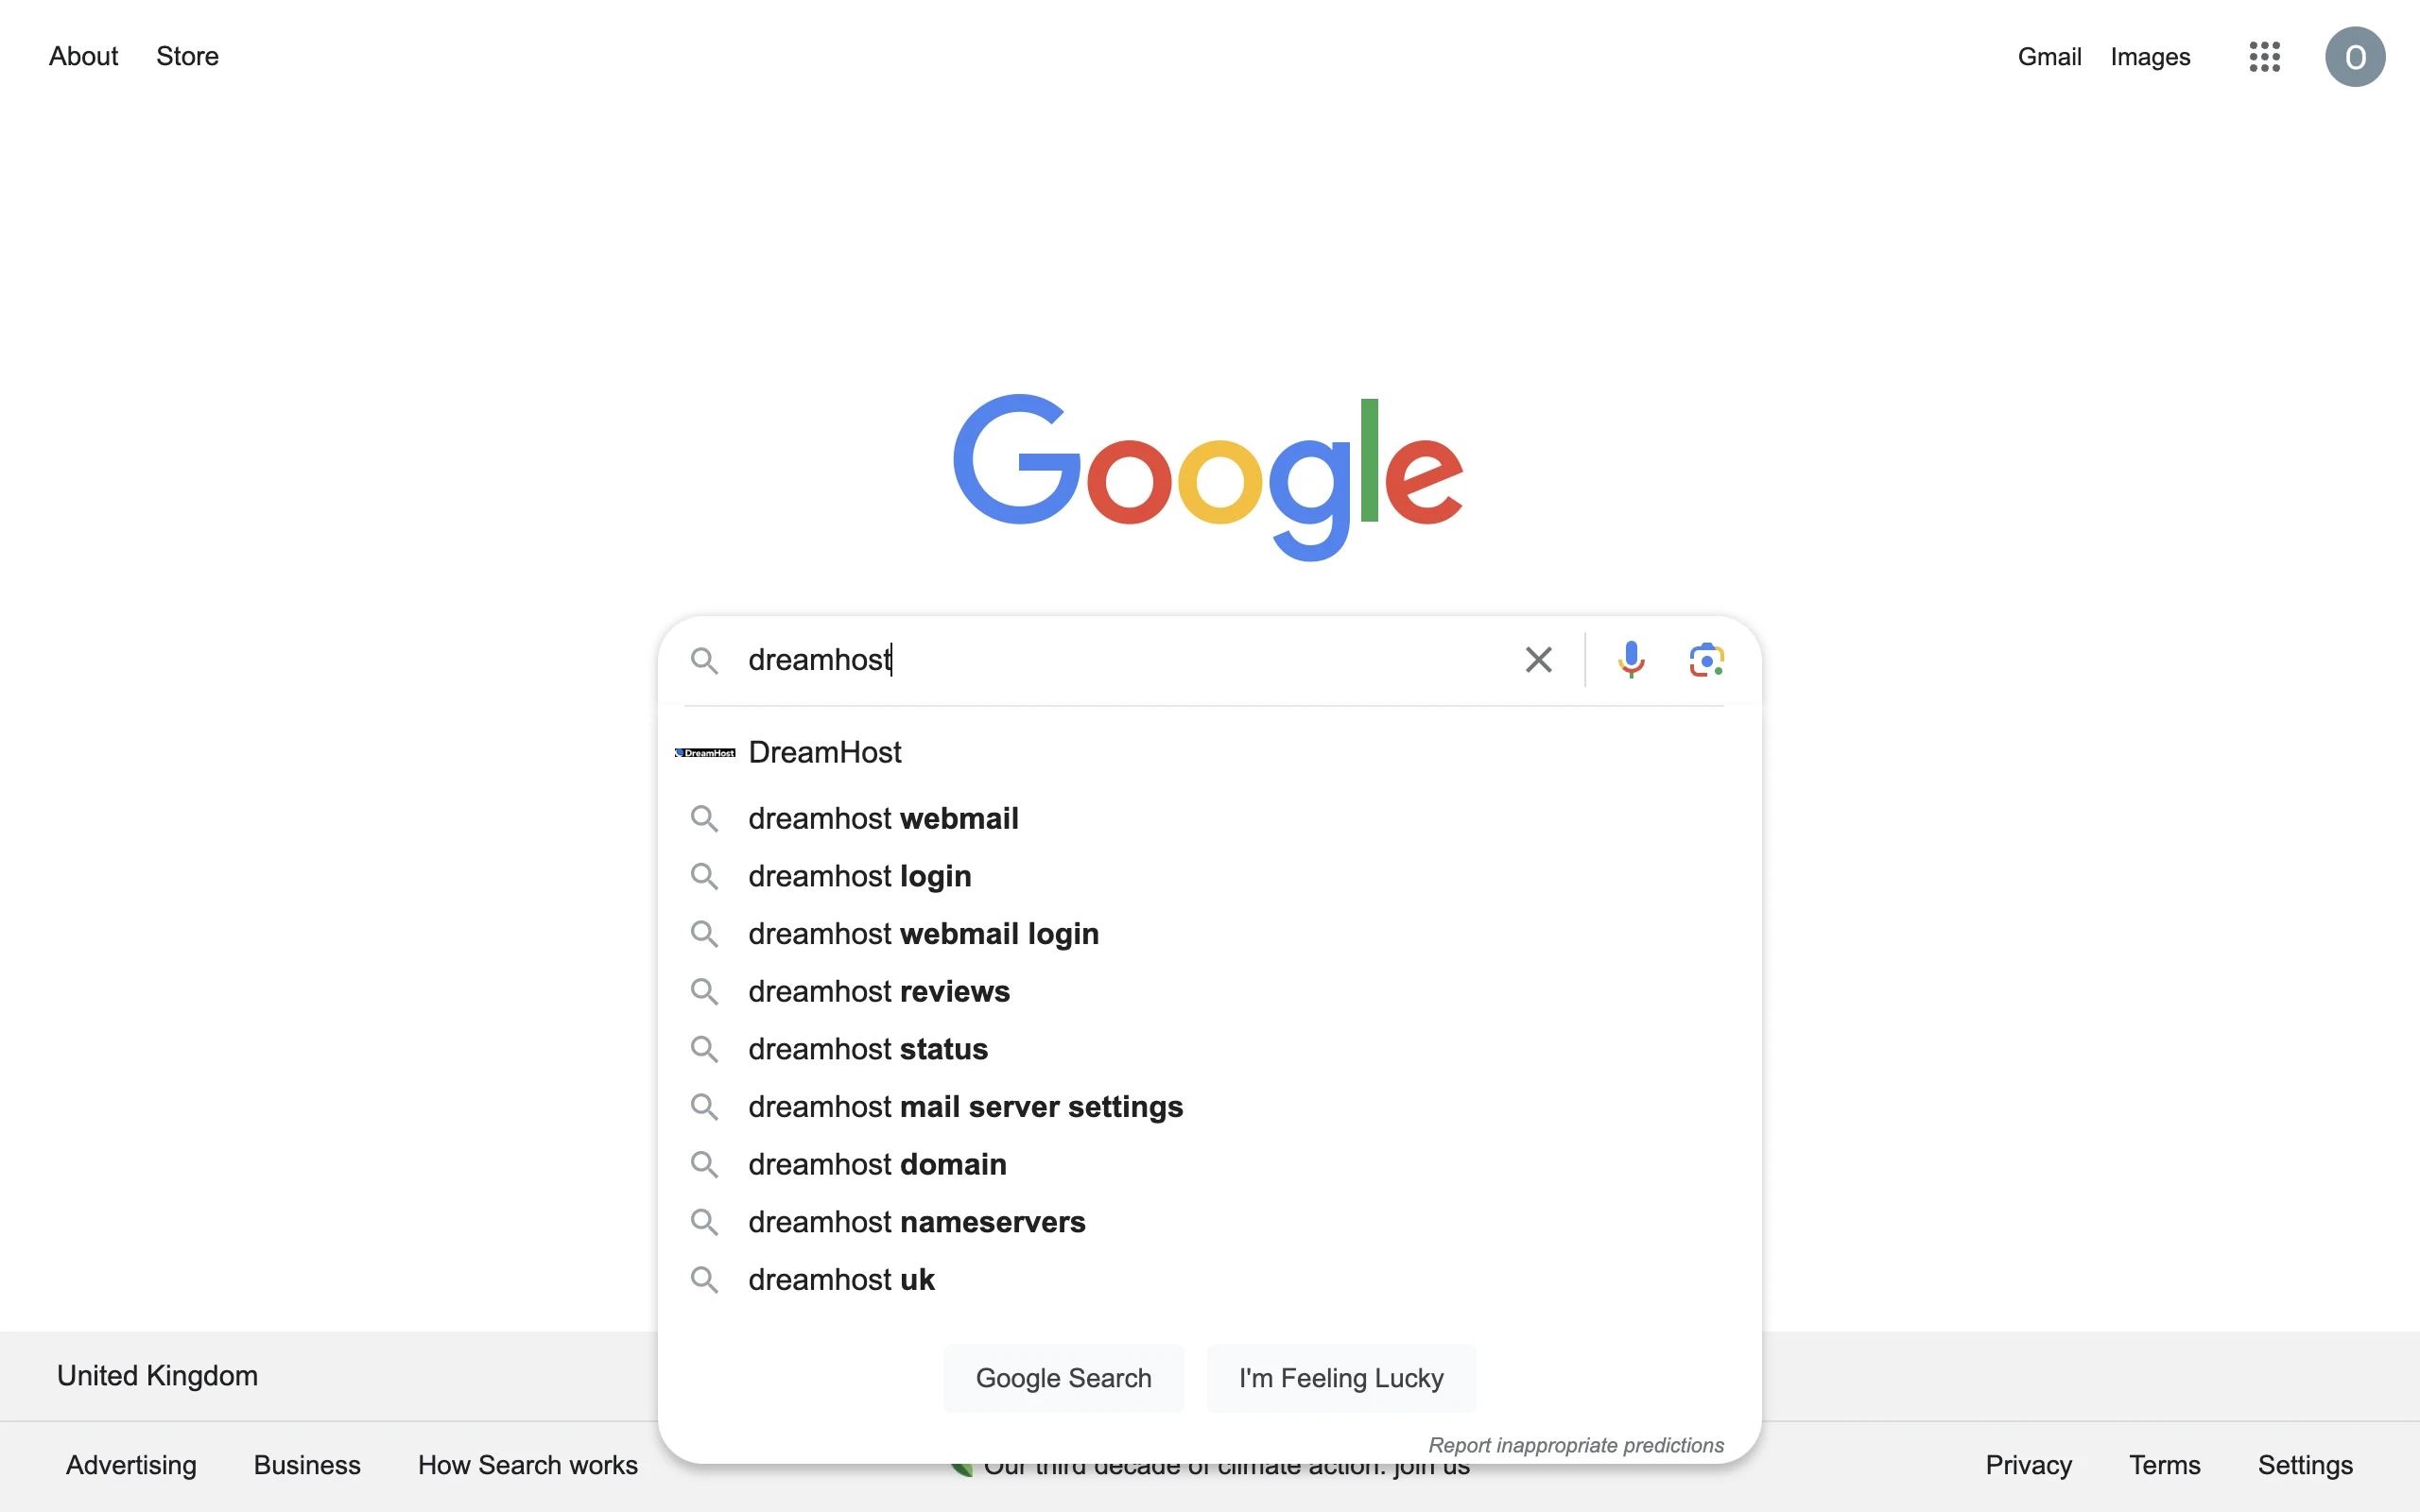 Google search for "dreamhost" with related searches showing dreamhost webmail, dreamhost login, dreamhost reviews, etc.